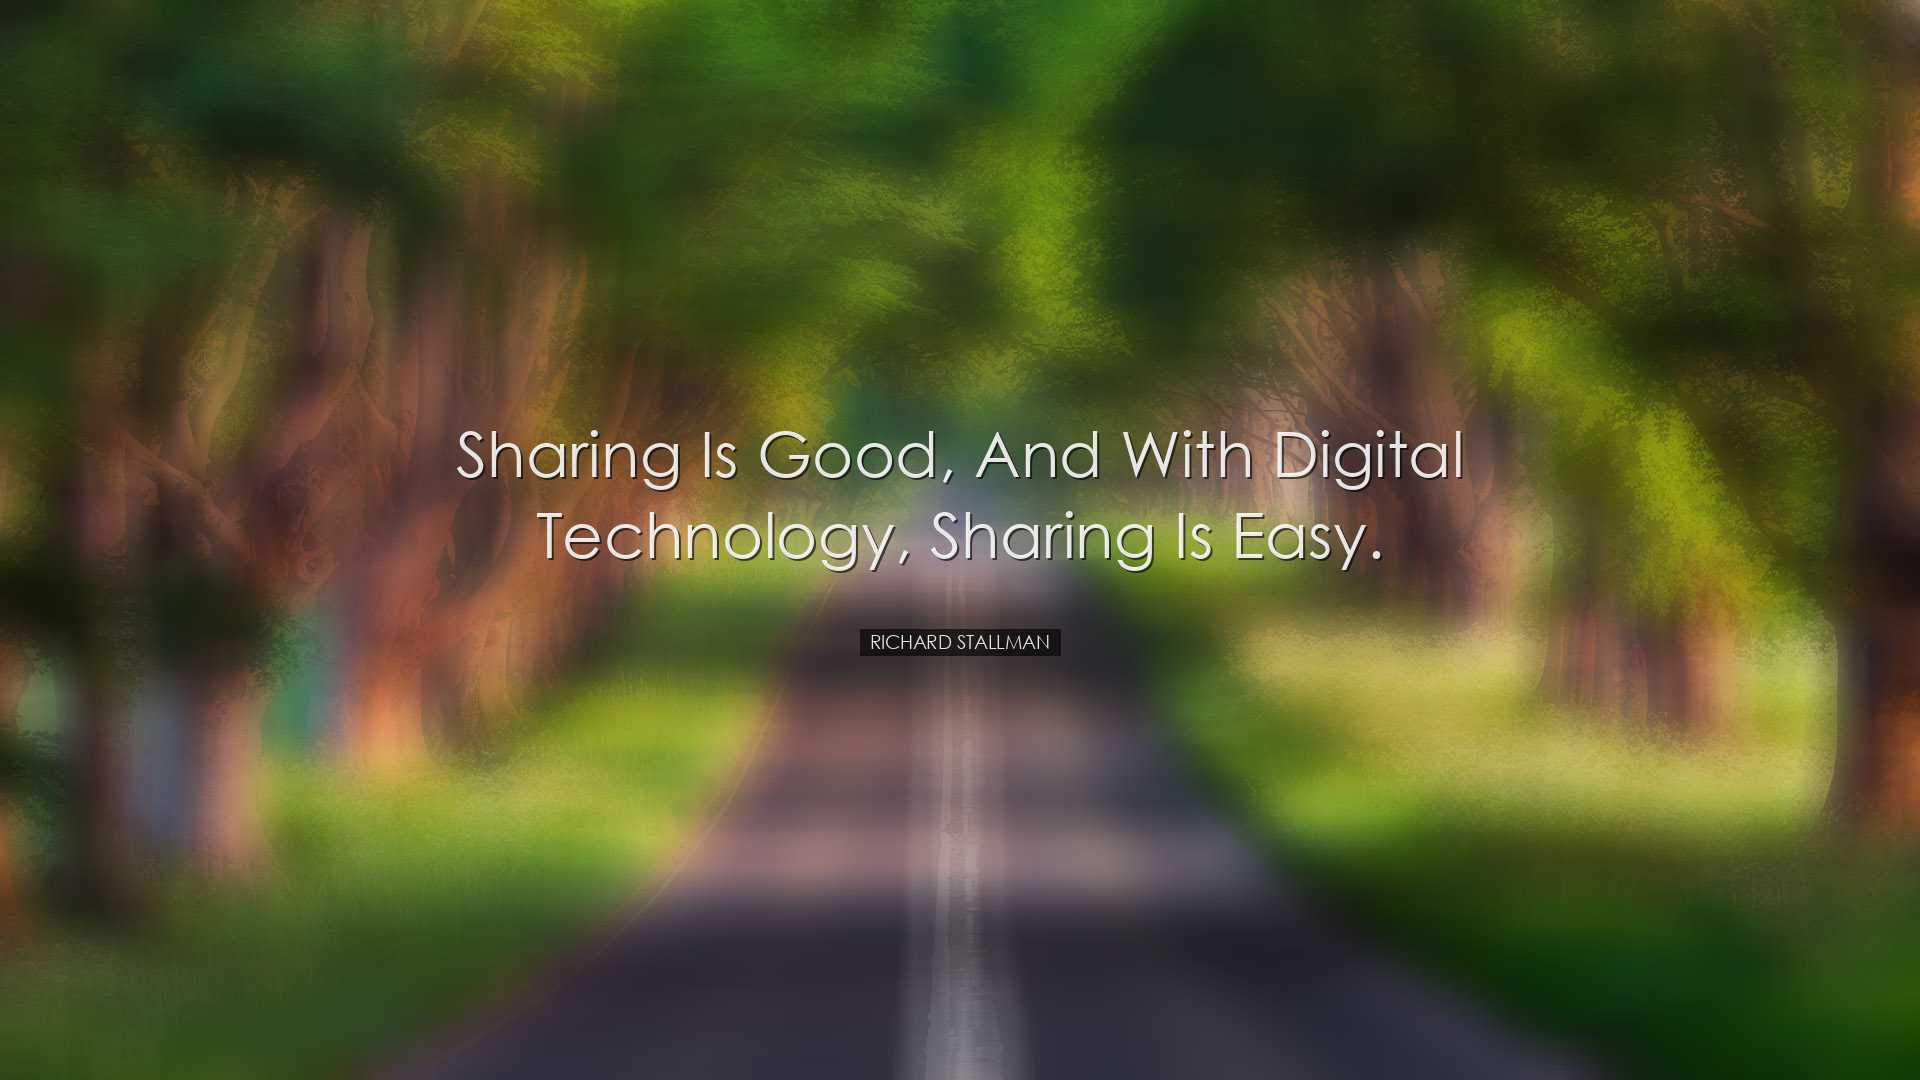 Sharing is good, and with digital technology, sharing is easy. - R